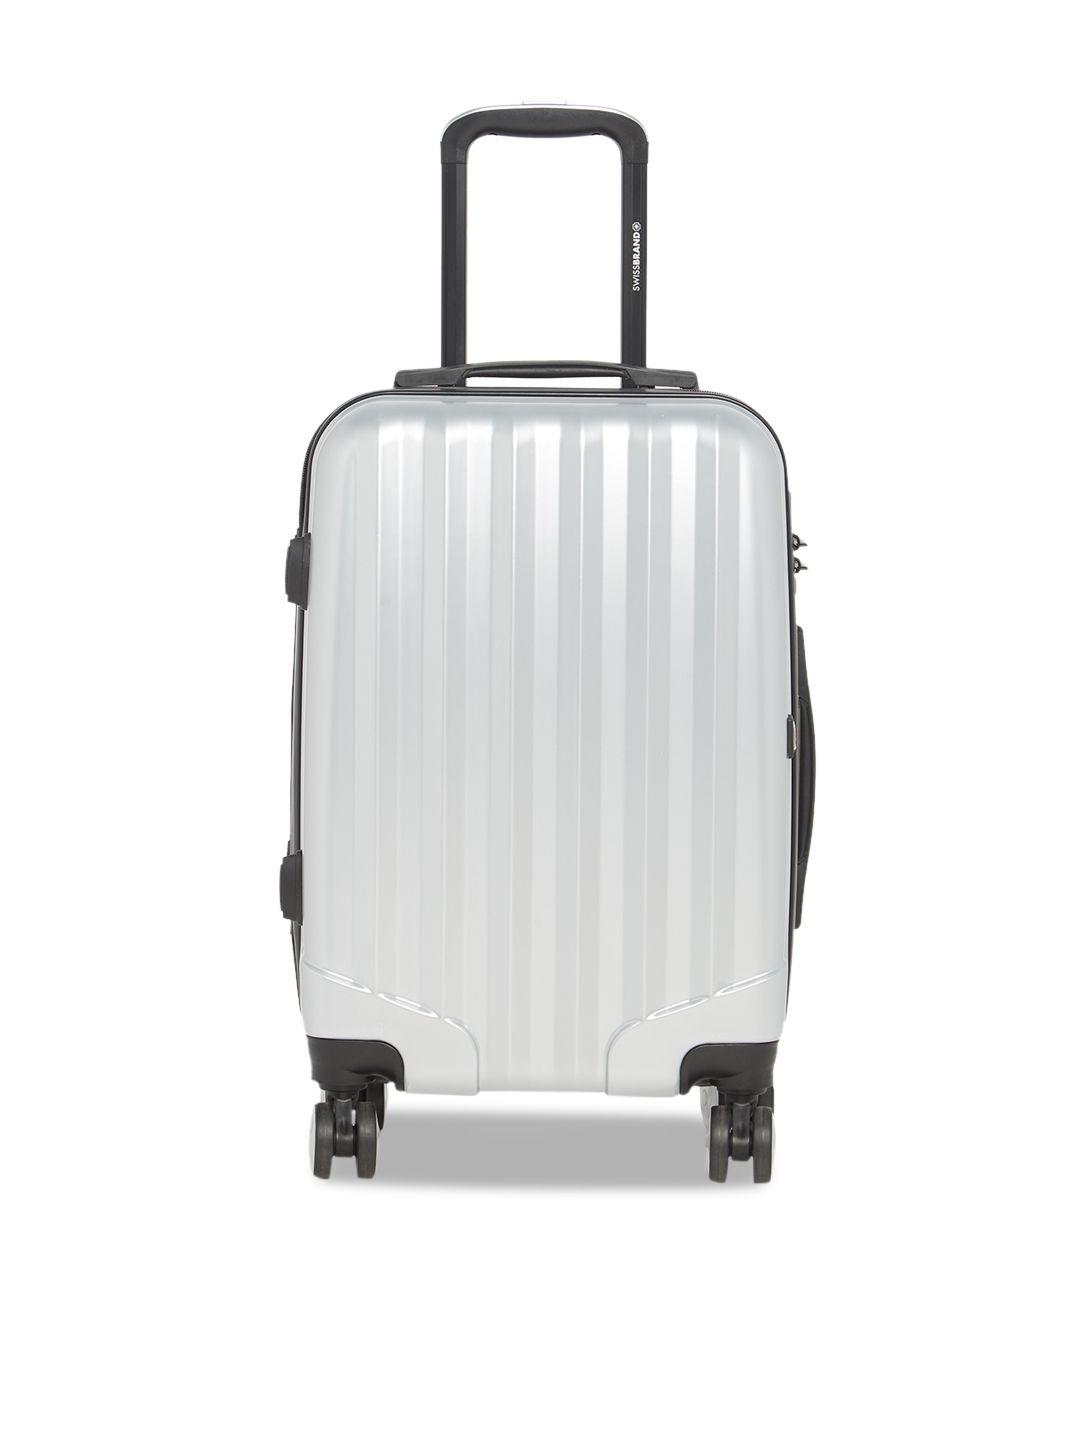 swiss brand silver-toned solid baden 360-degree rotation hard-sided cabin trolley suitcase